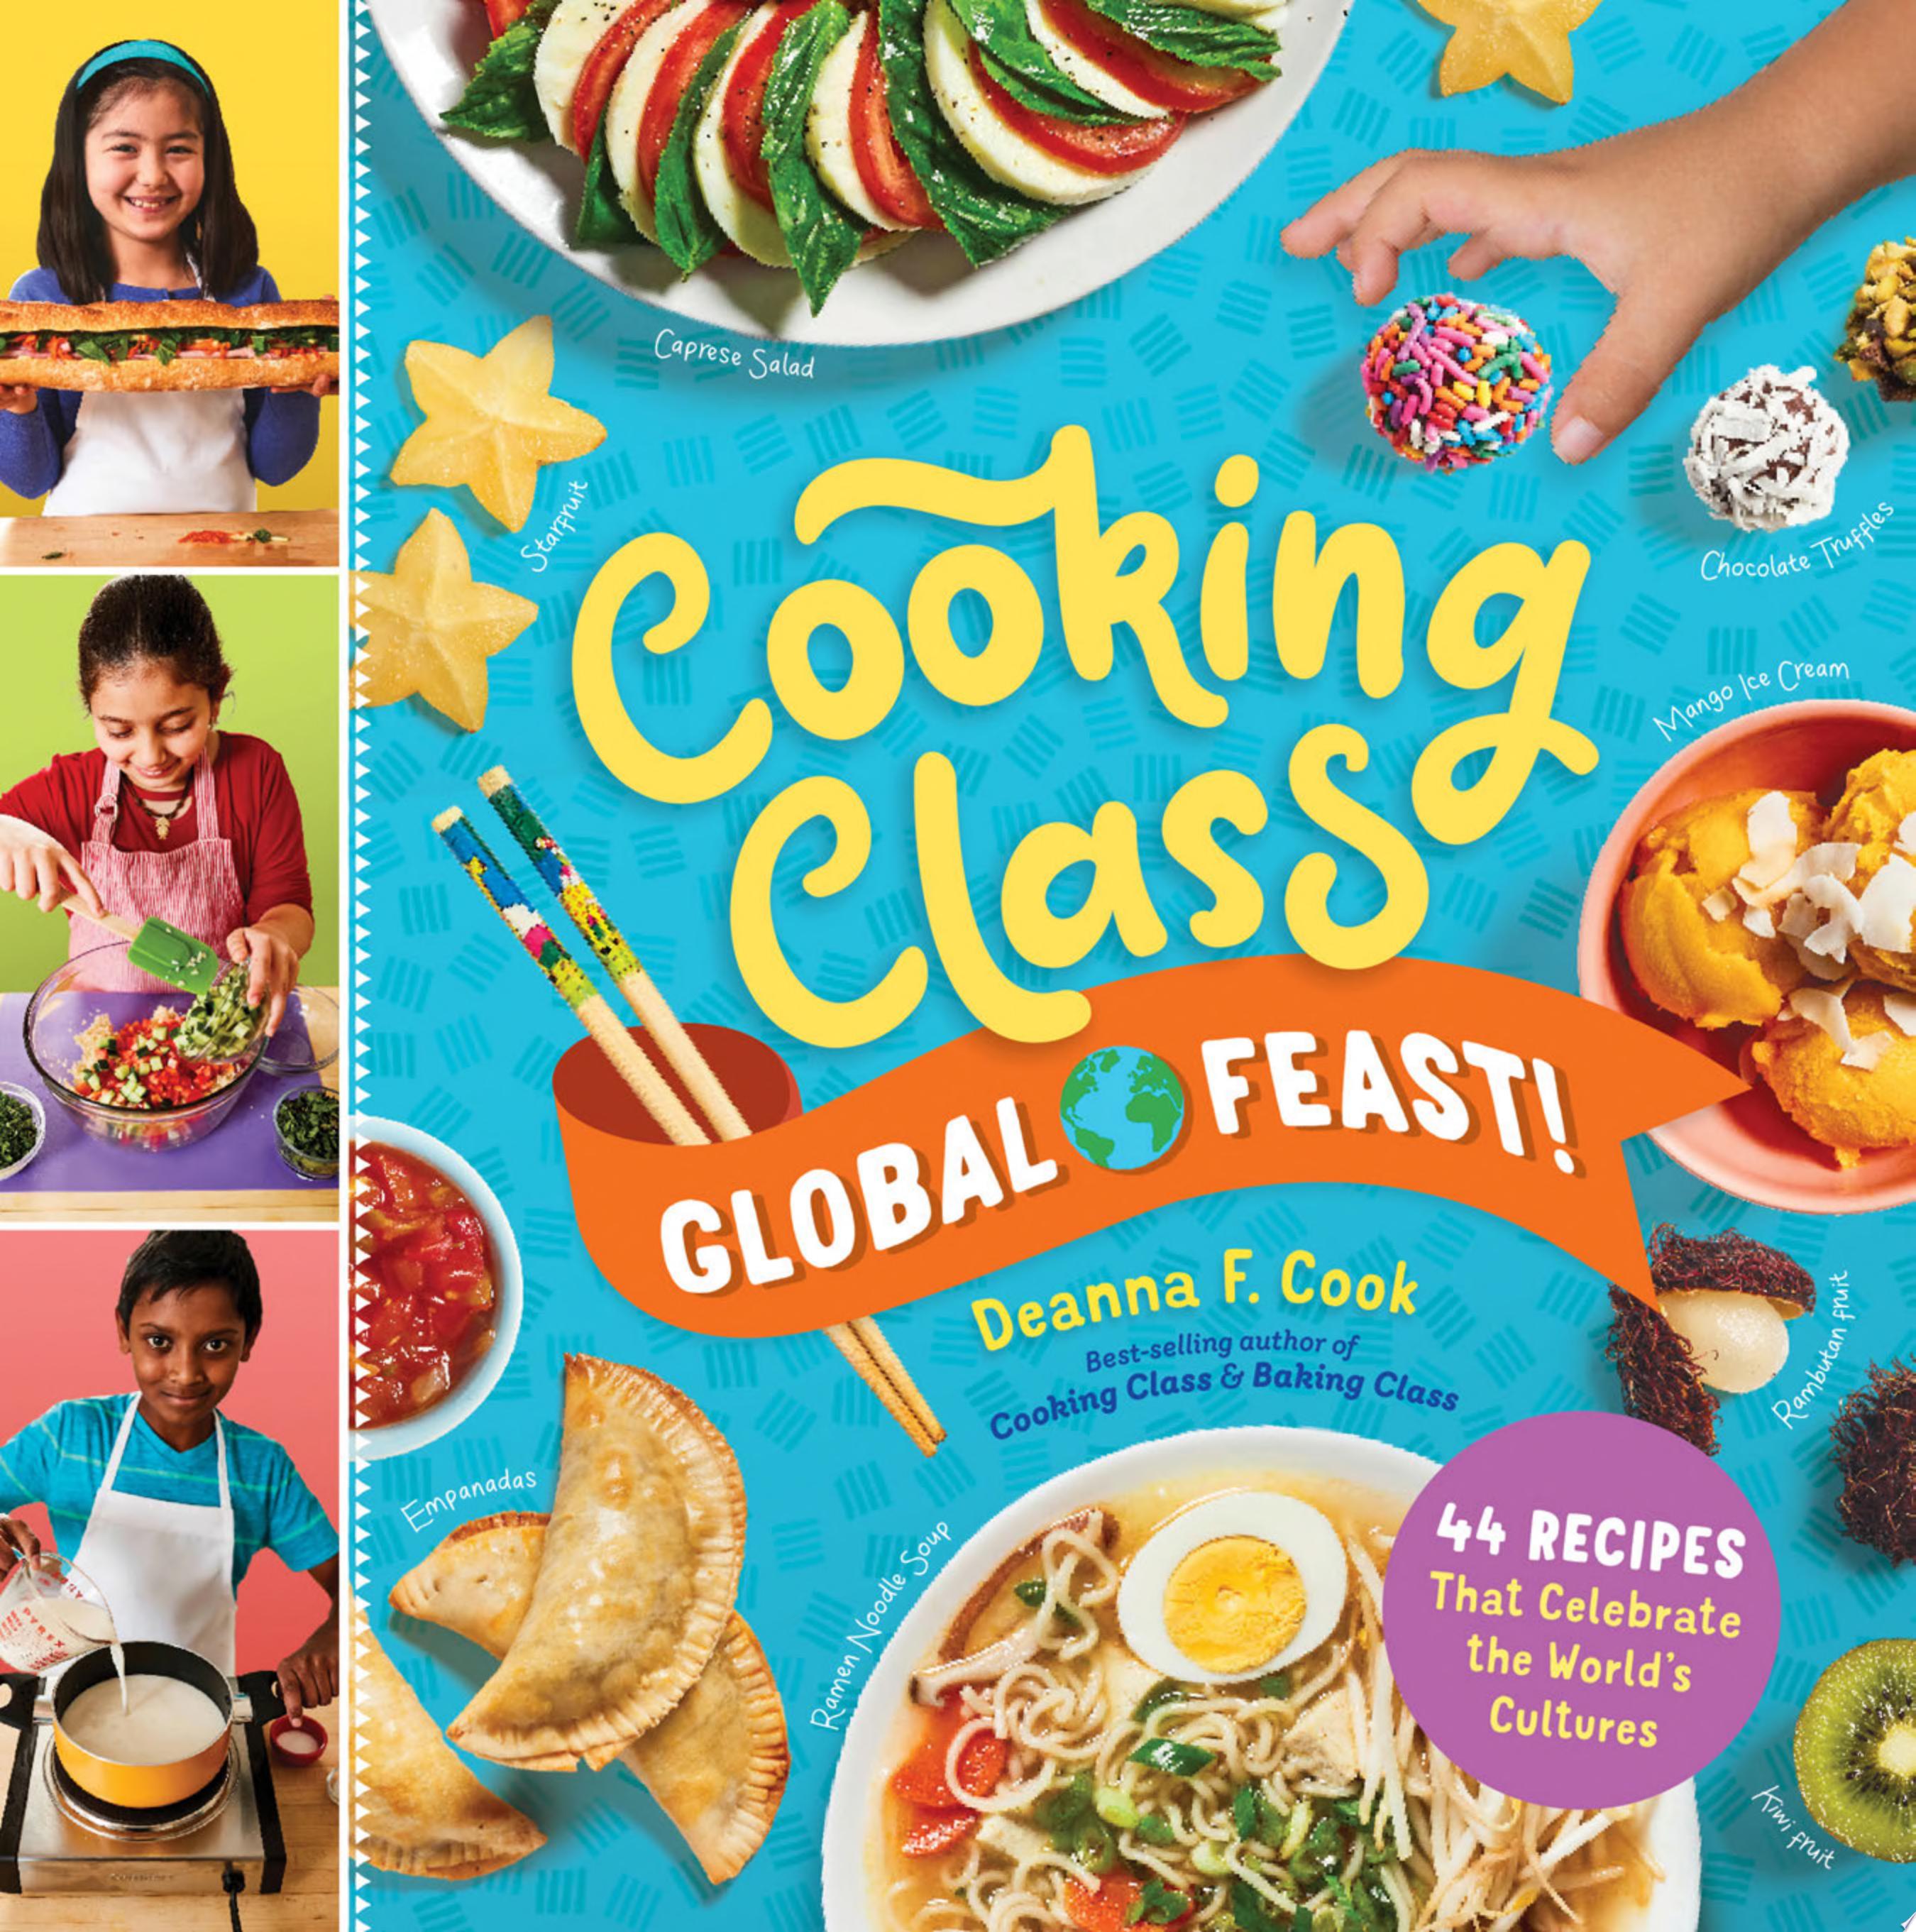 Image for "Cooking Class Global Feast!"